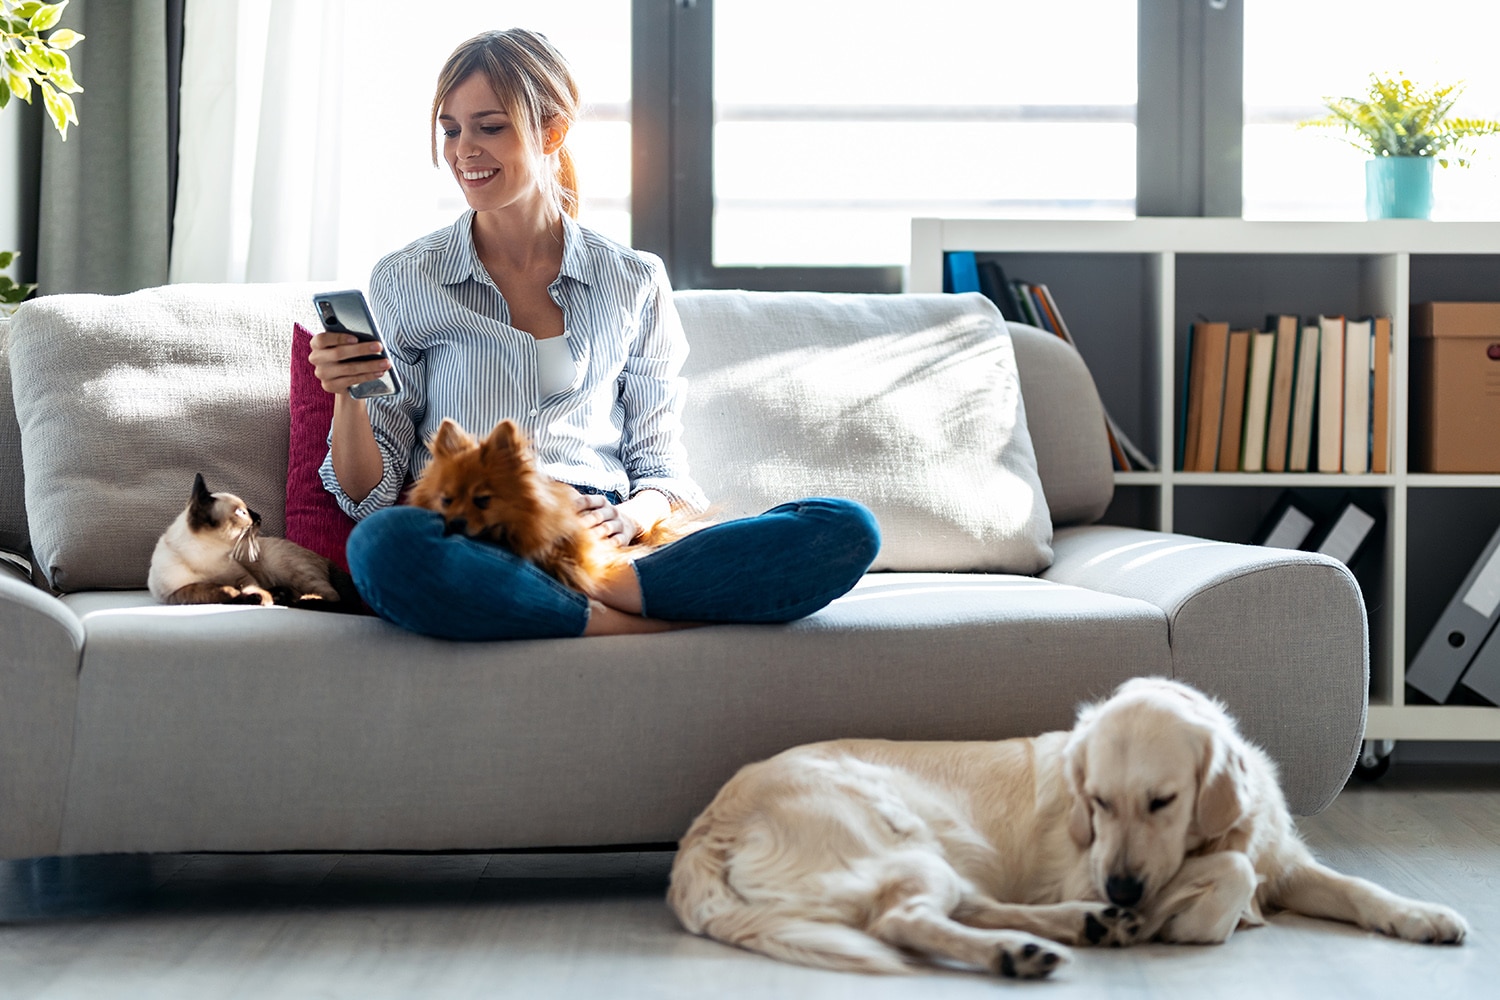 Person sitting on couch, smiling and surrounded by pets, while using patient self-scheduling software to book a doctor's appointment.